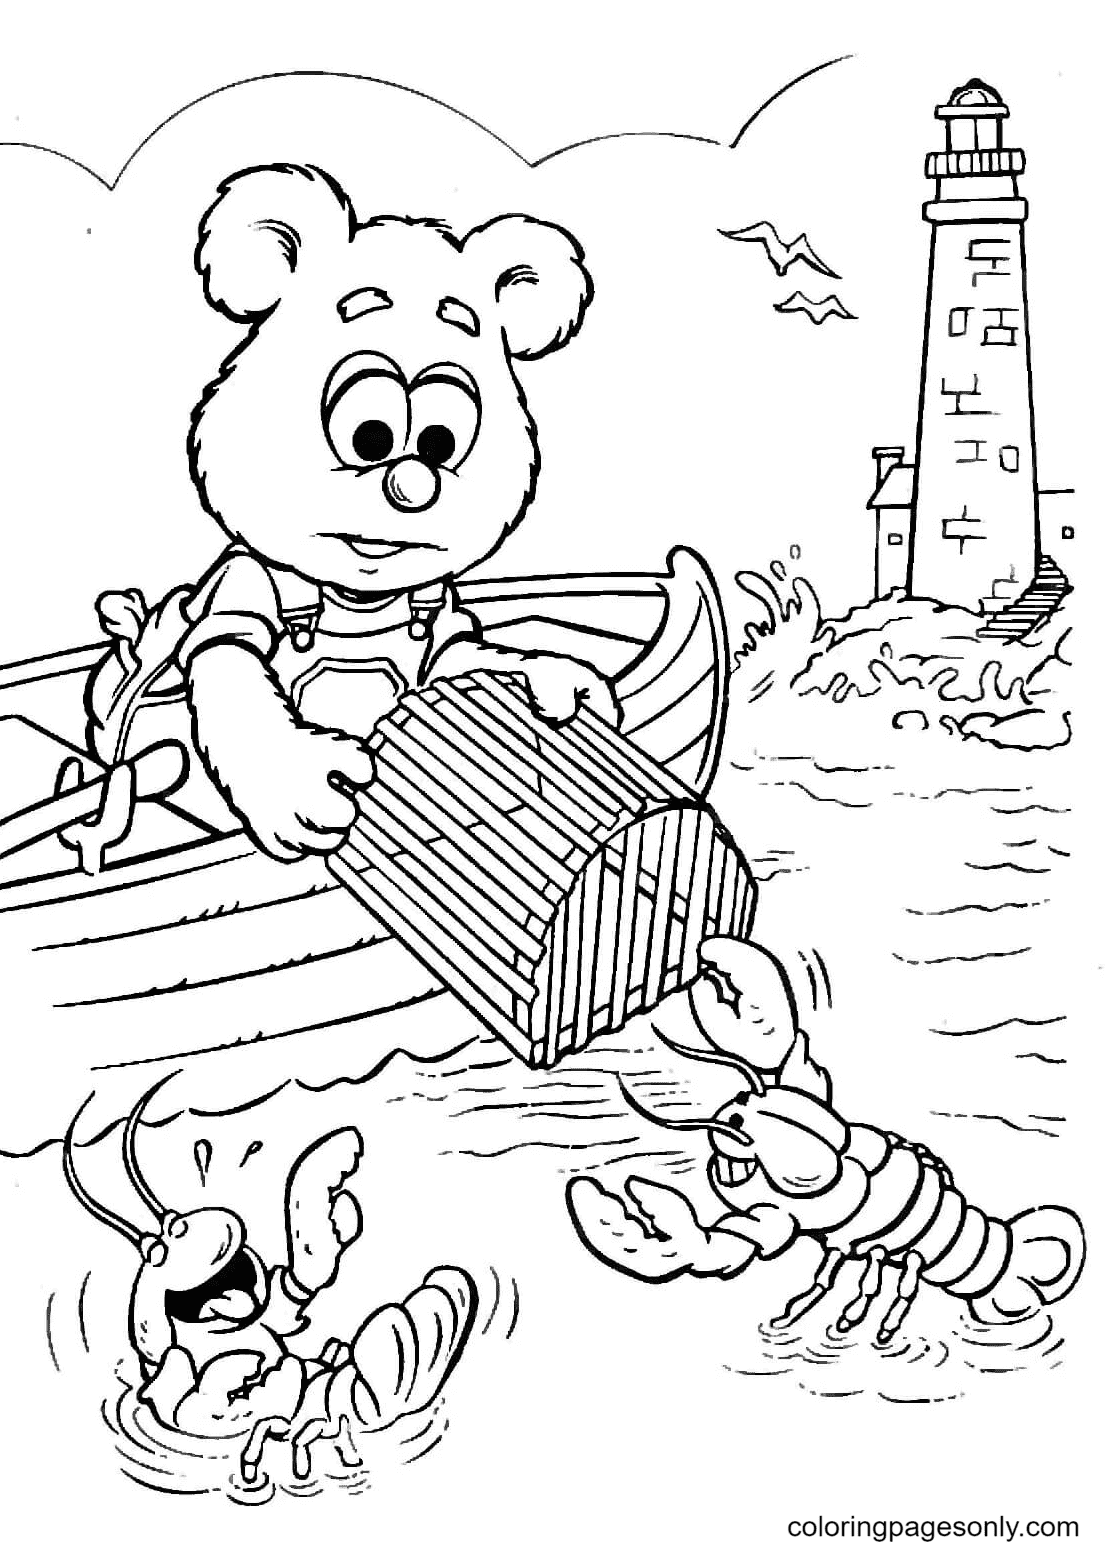 Fozzie is fishing for Lobsters Coloring Pages